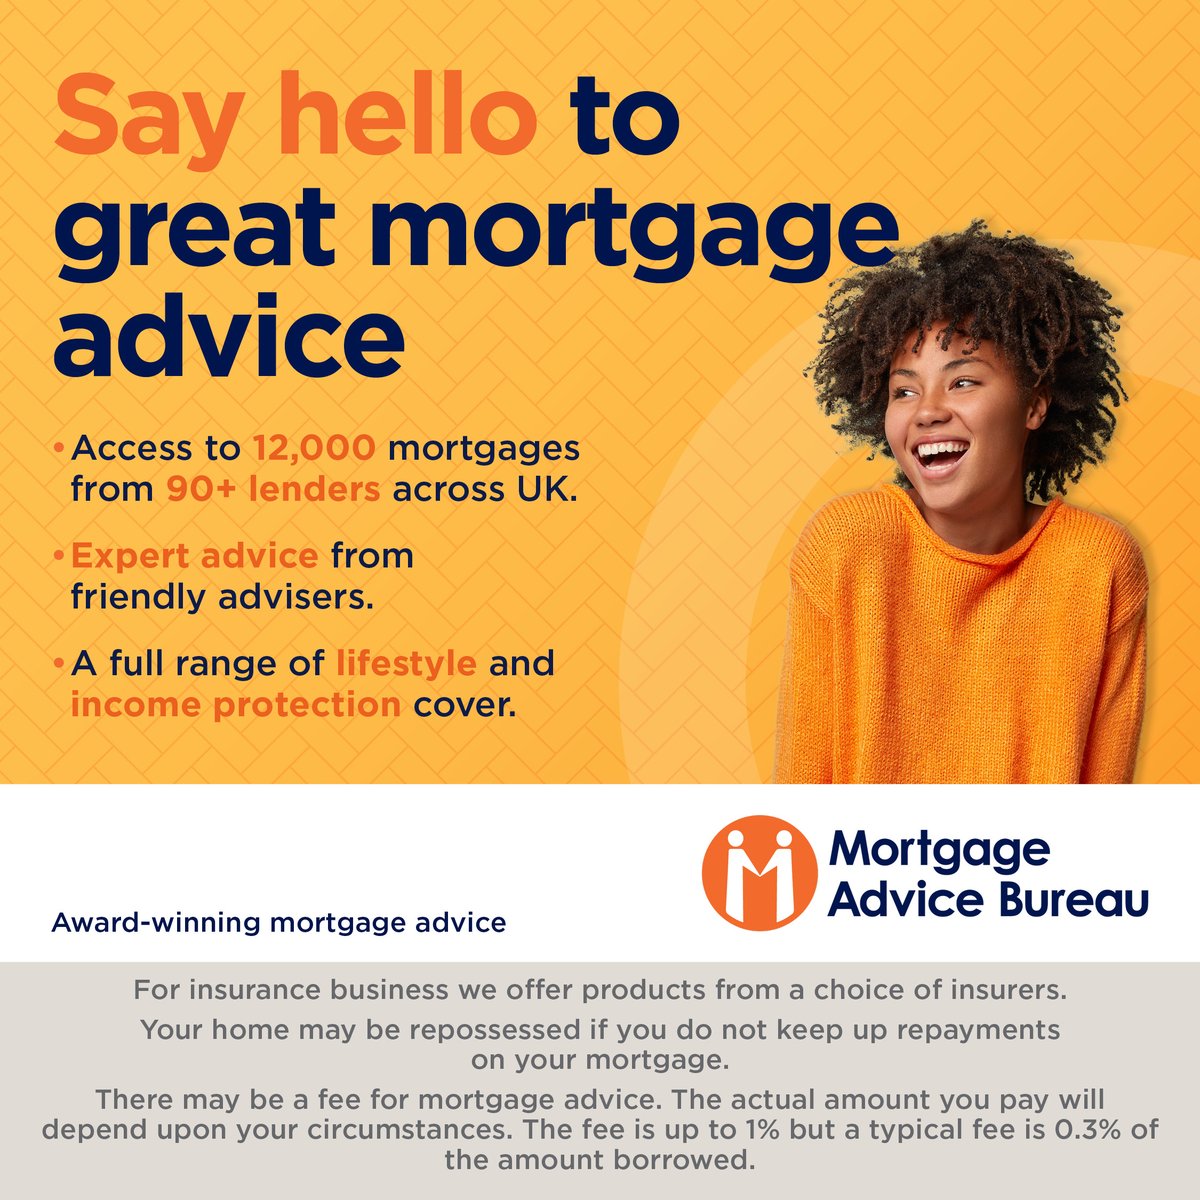 Say hello to great mortgage advice 👋

However, what are the benefits of getting mortgage advice from a mortgage adviser? 🤔

Have a read of the below article to find out more 

🔗ow.ly/n3c050P9rXr

#mortgageadvice #mortgageadvisers #mortgageadvicebureau #sayhello